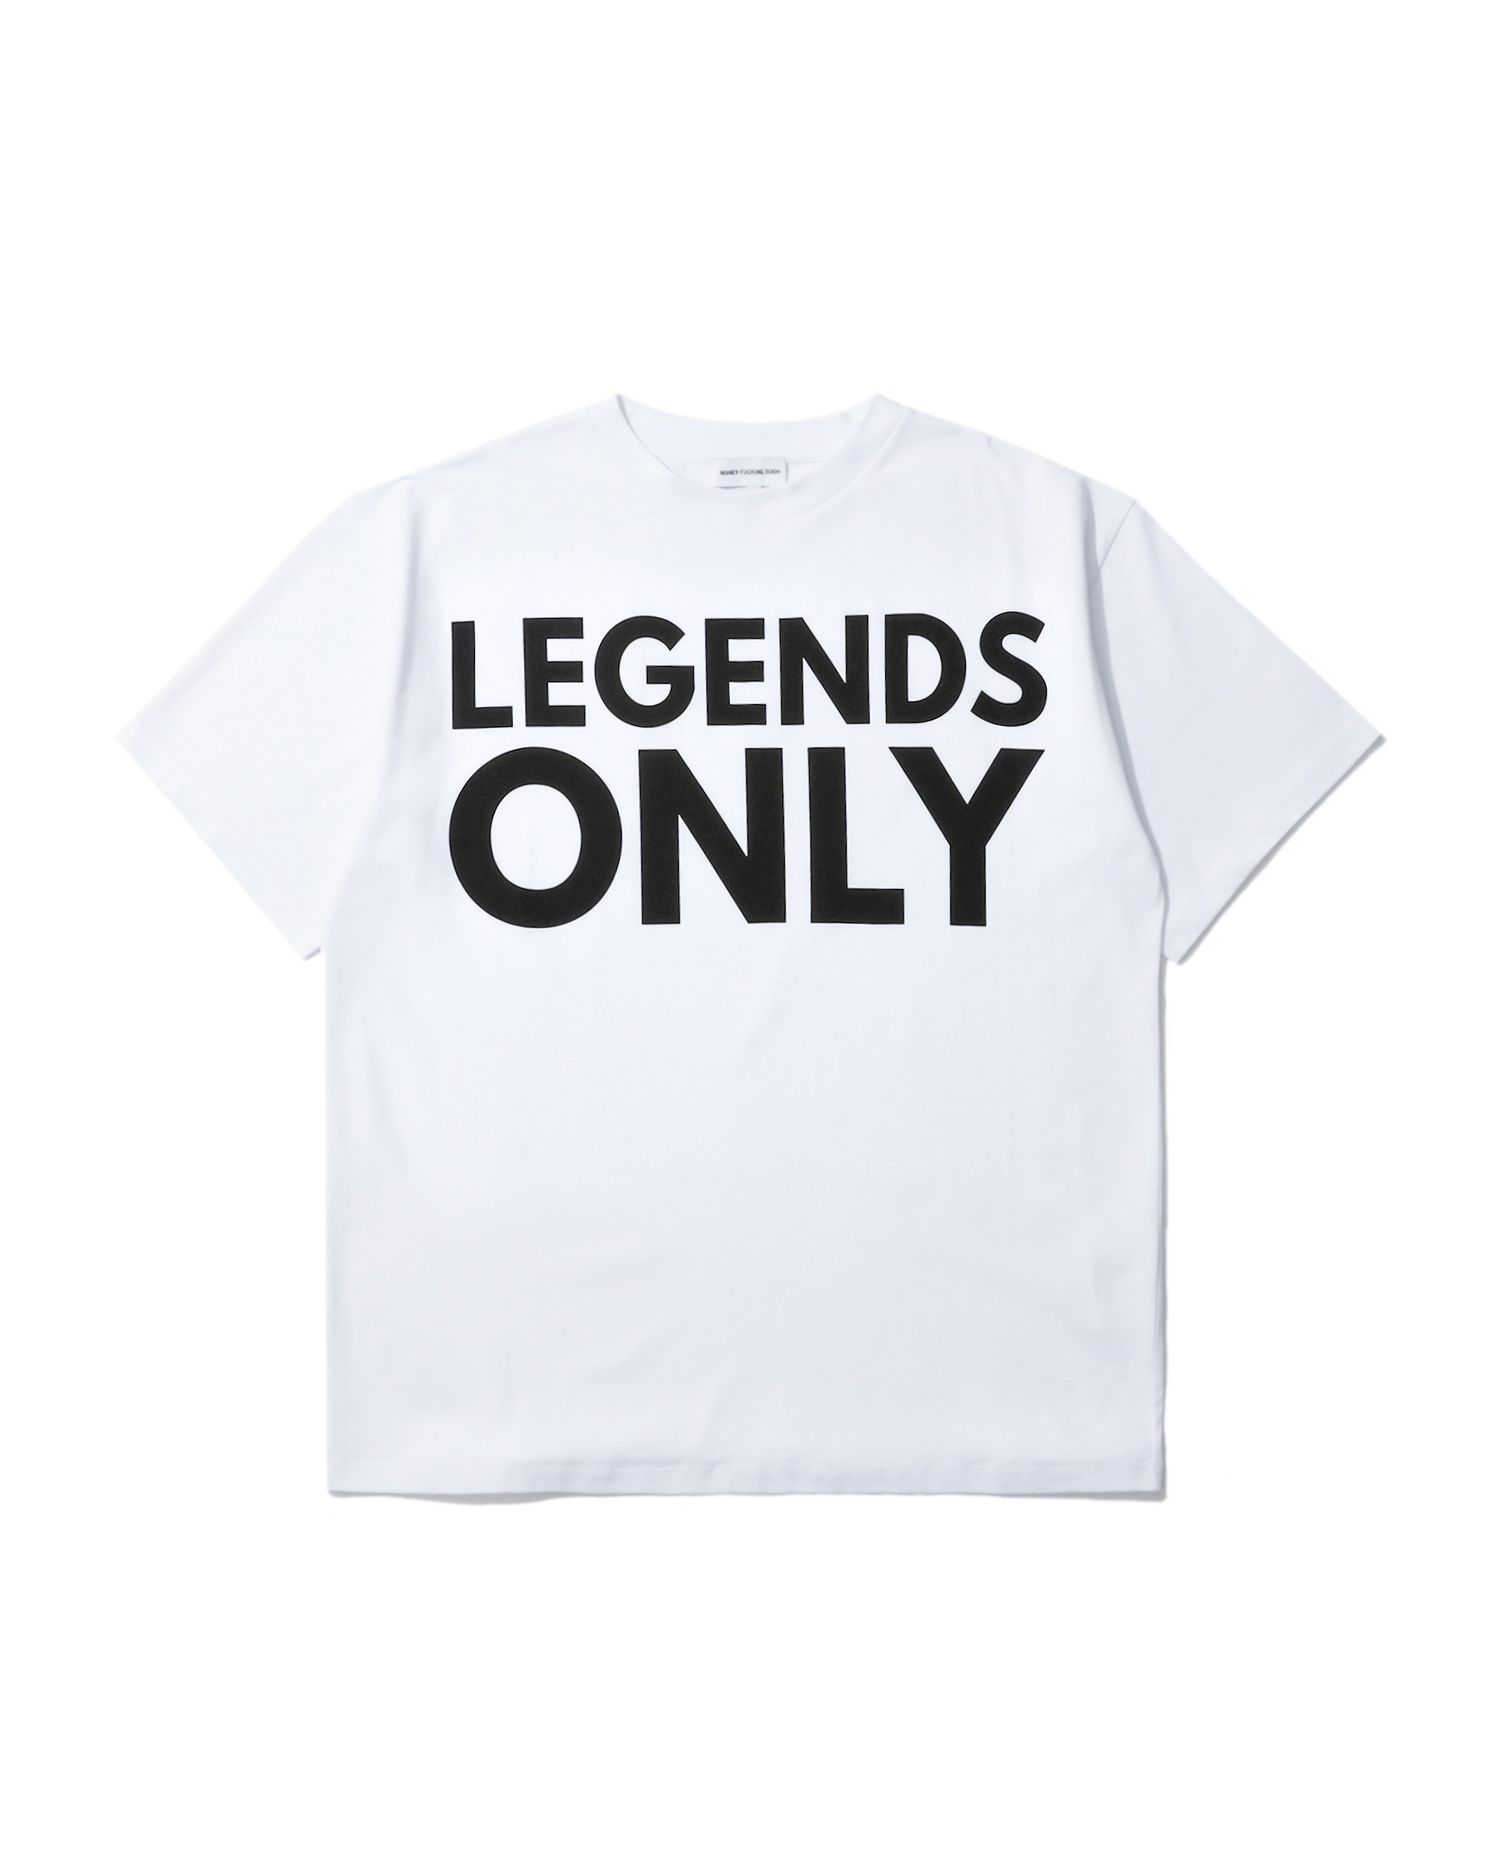 legends only tee